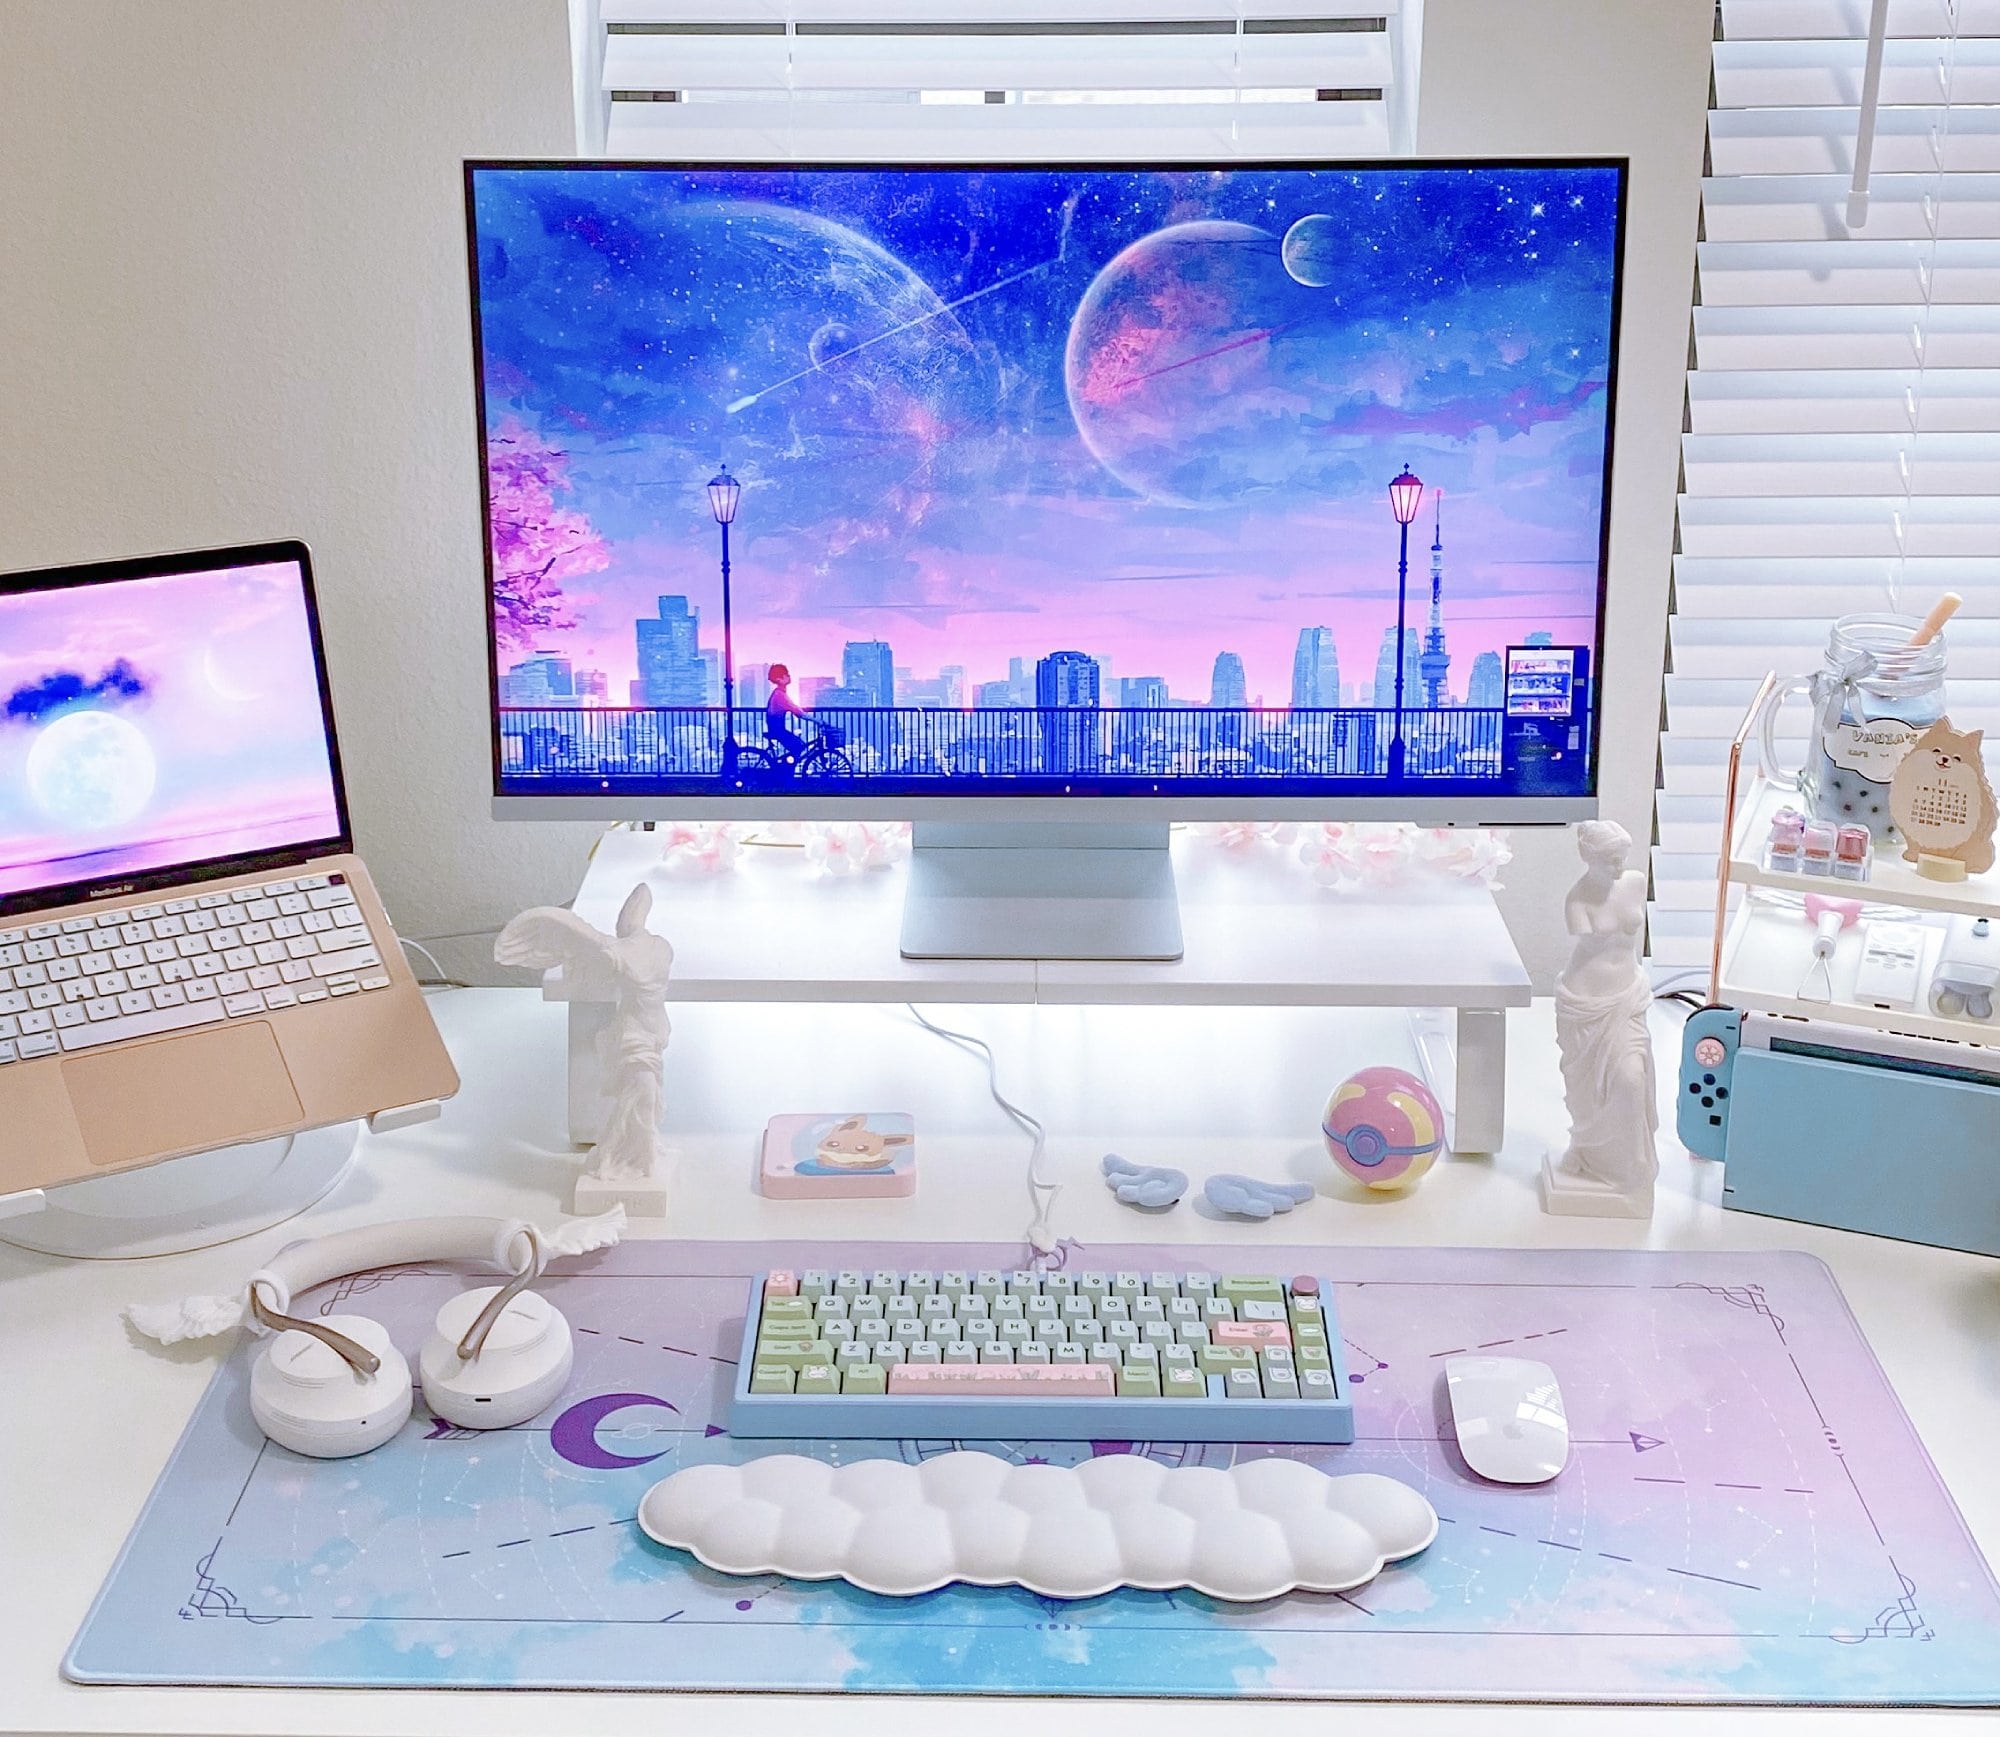 A dreamy home battlestation with a Samsung M8 Smart Monitor